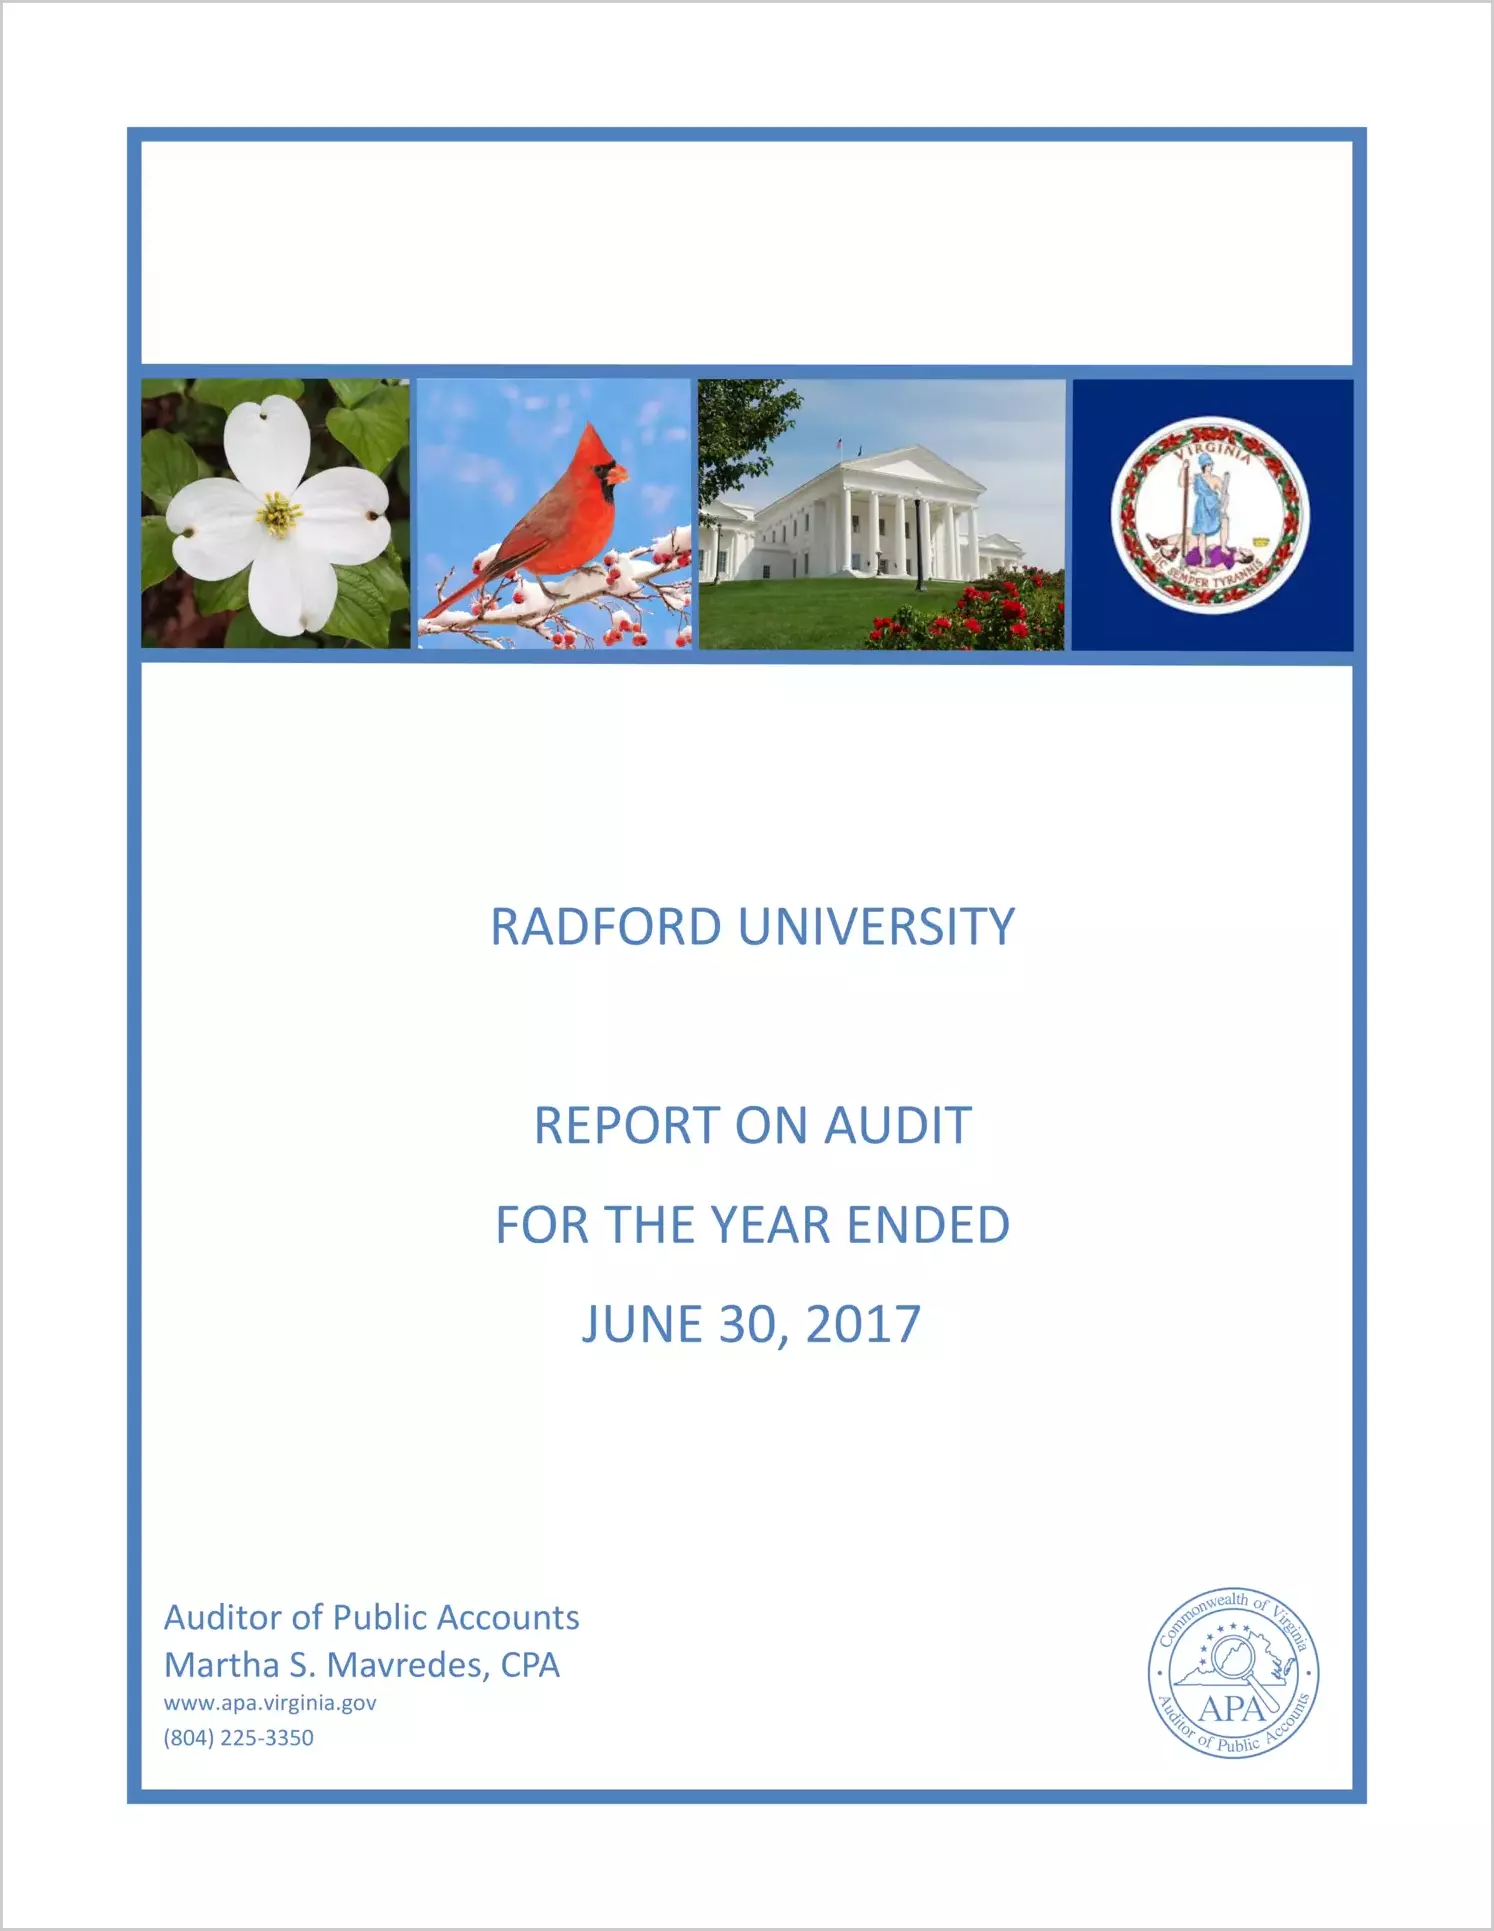 Radford University for the year ended June 30, 2017